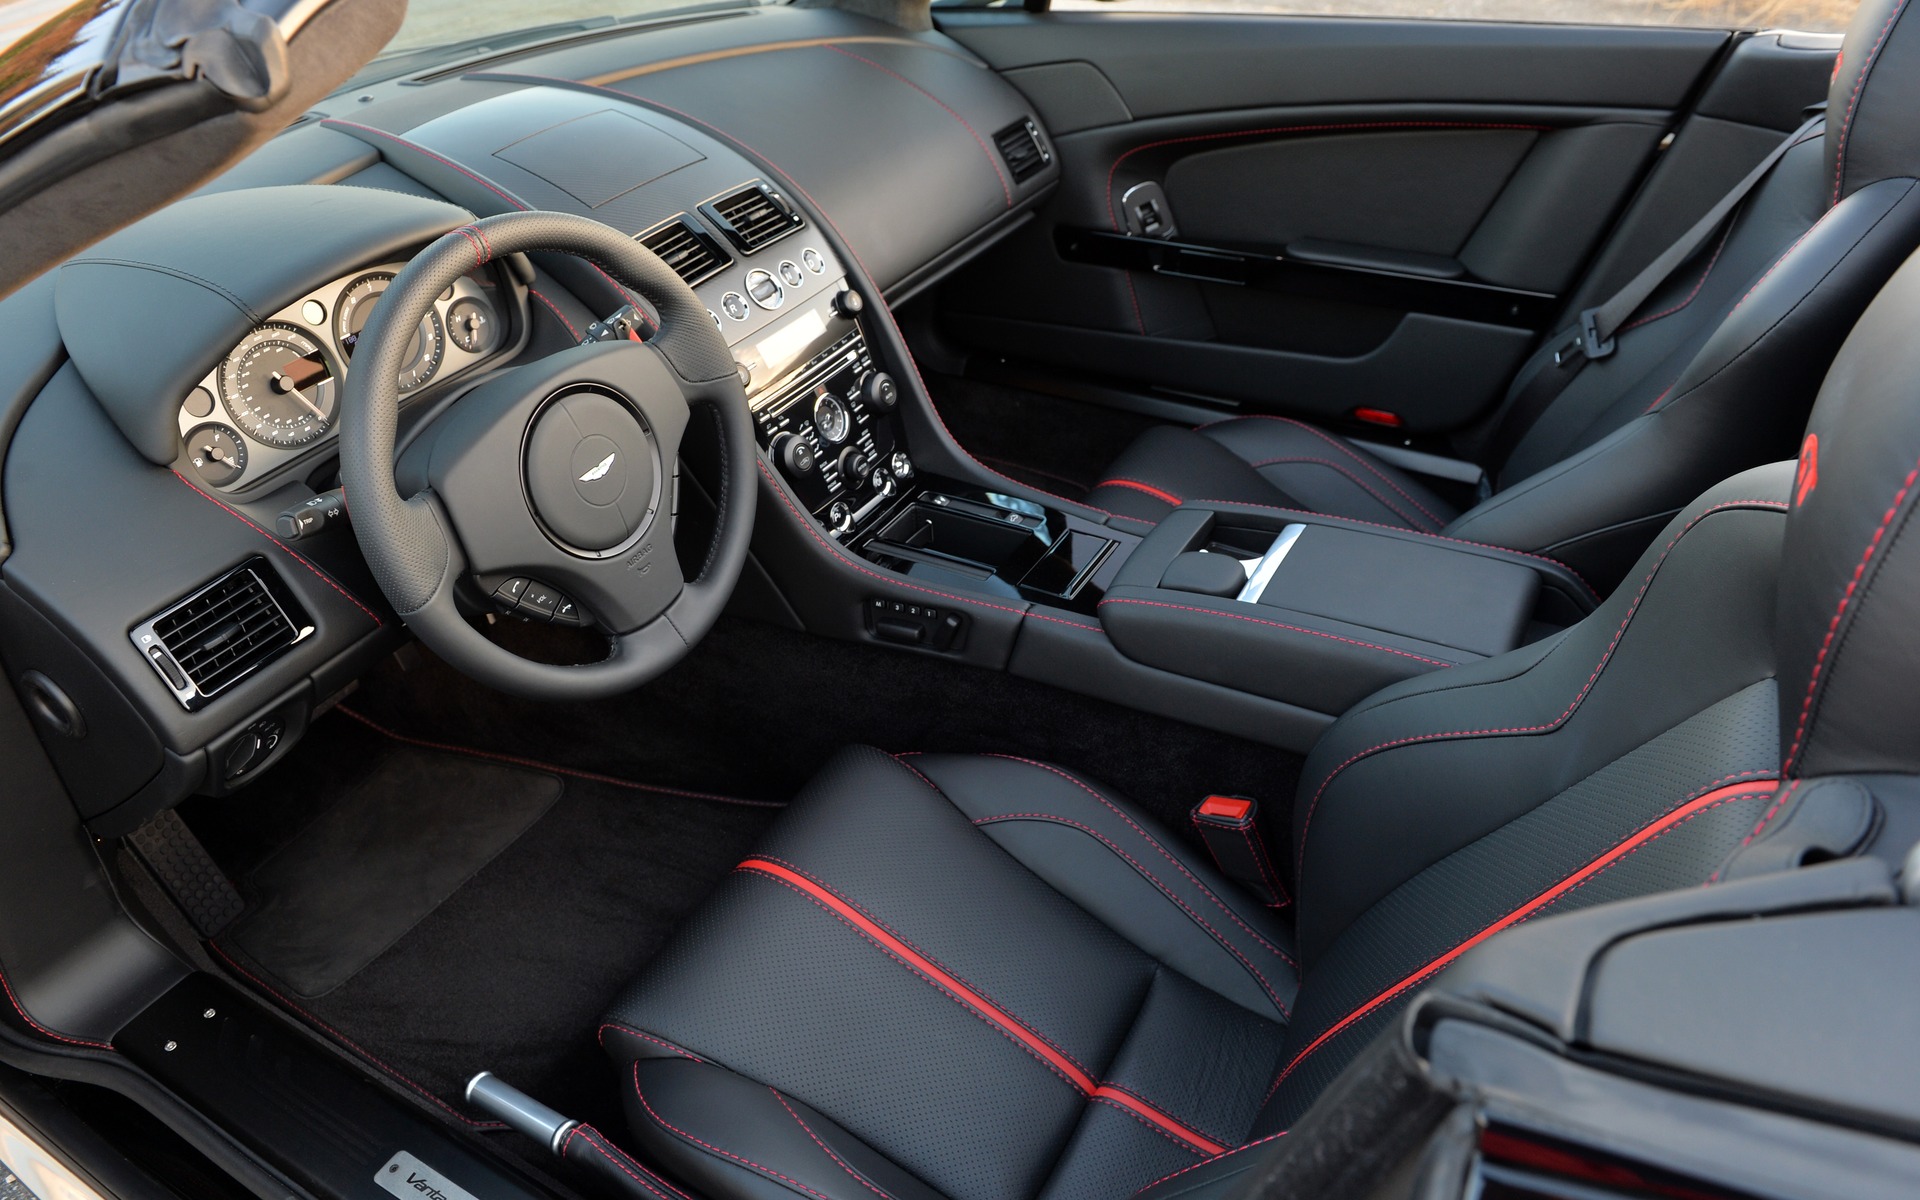 There nothing minimalist about the V8 Vantage GT's interior.